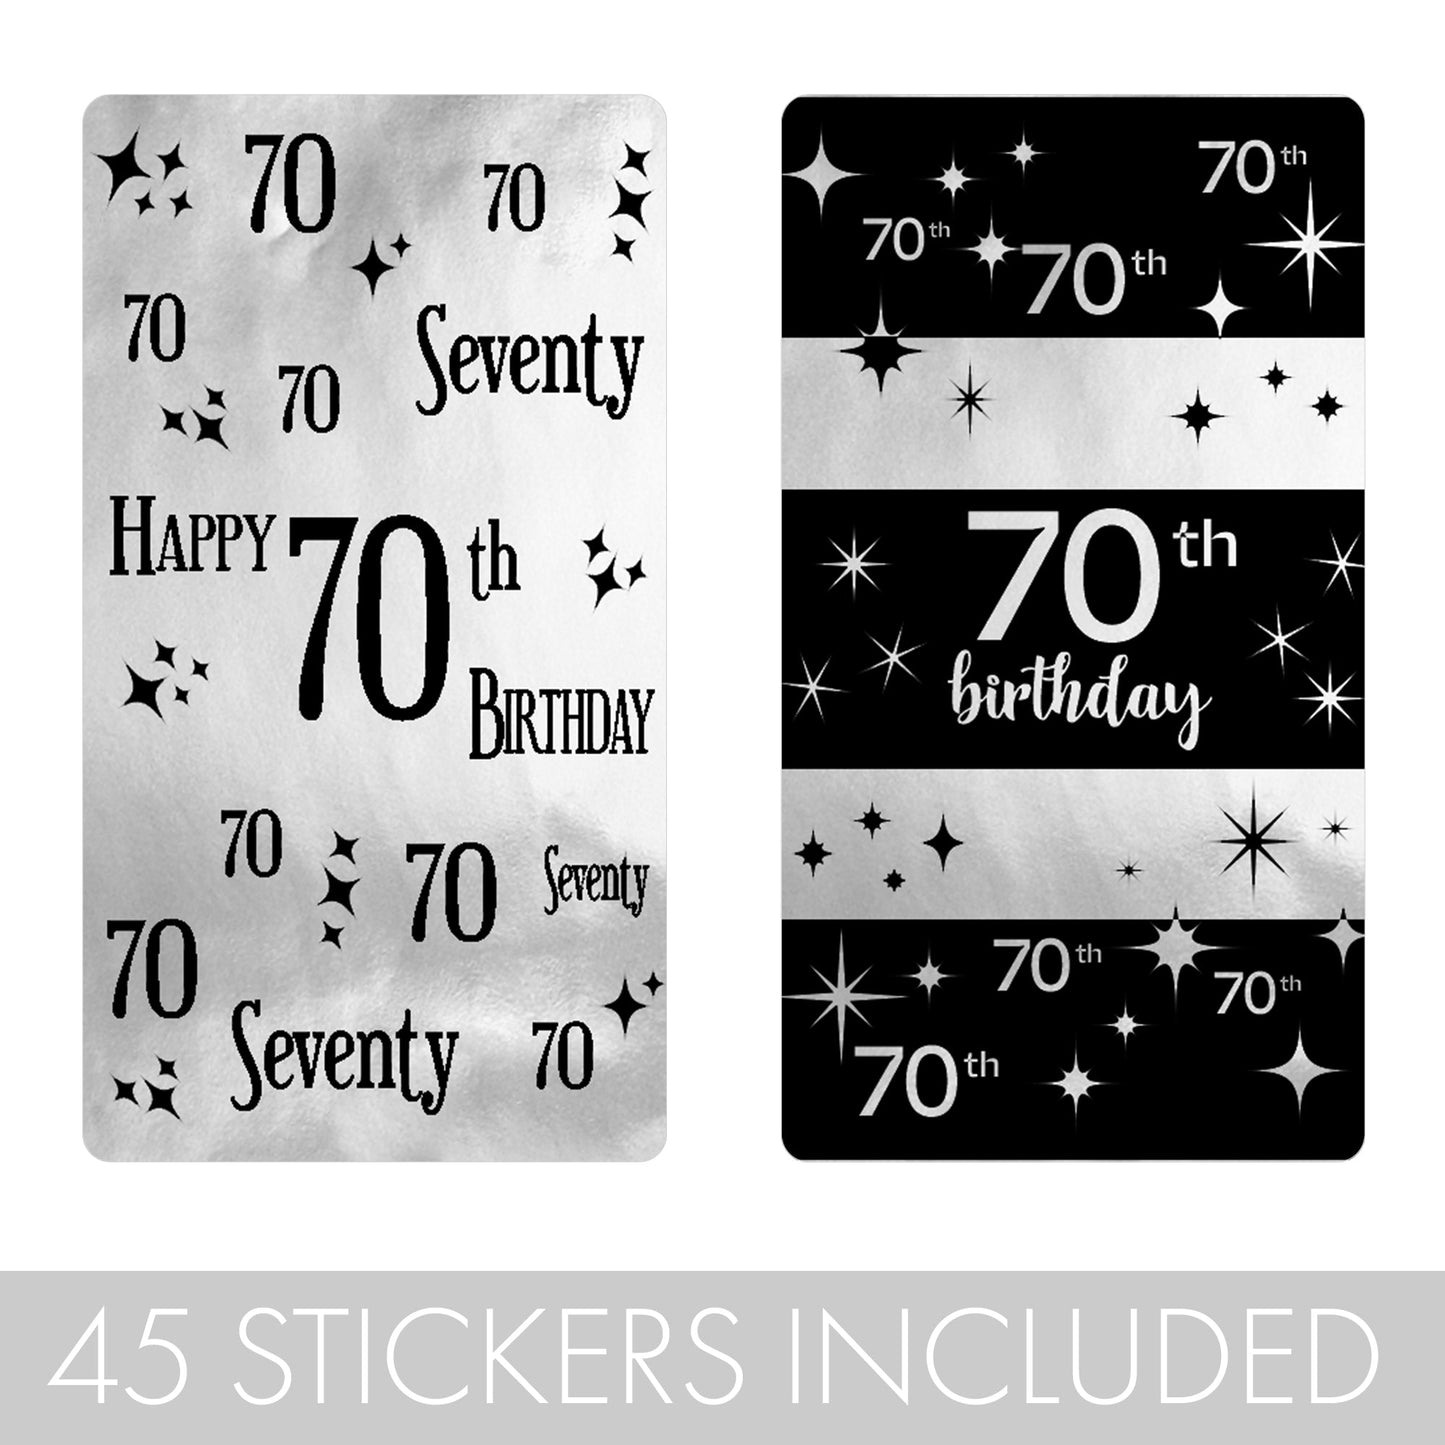 Make a 70th birthday even sweeter with these 45 Count Black and Silver Shiny Foil Mini Candy Bar Stickers.